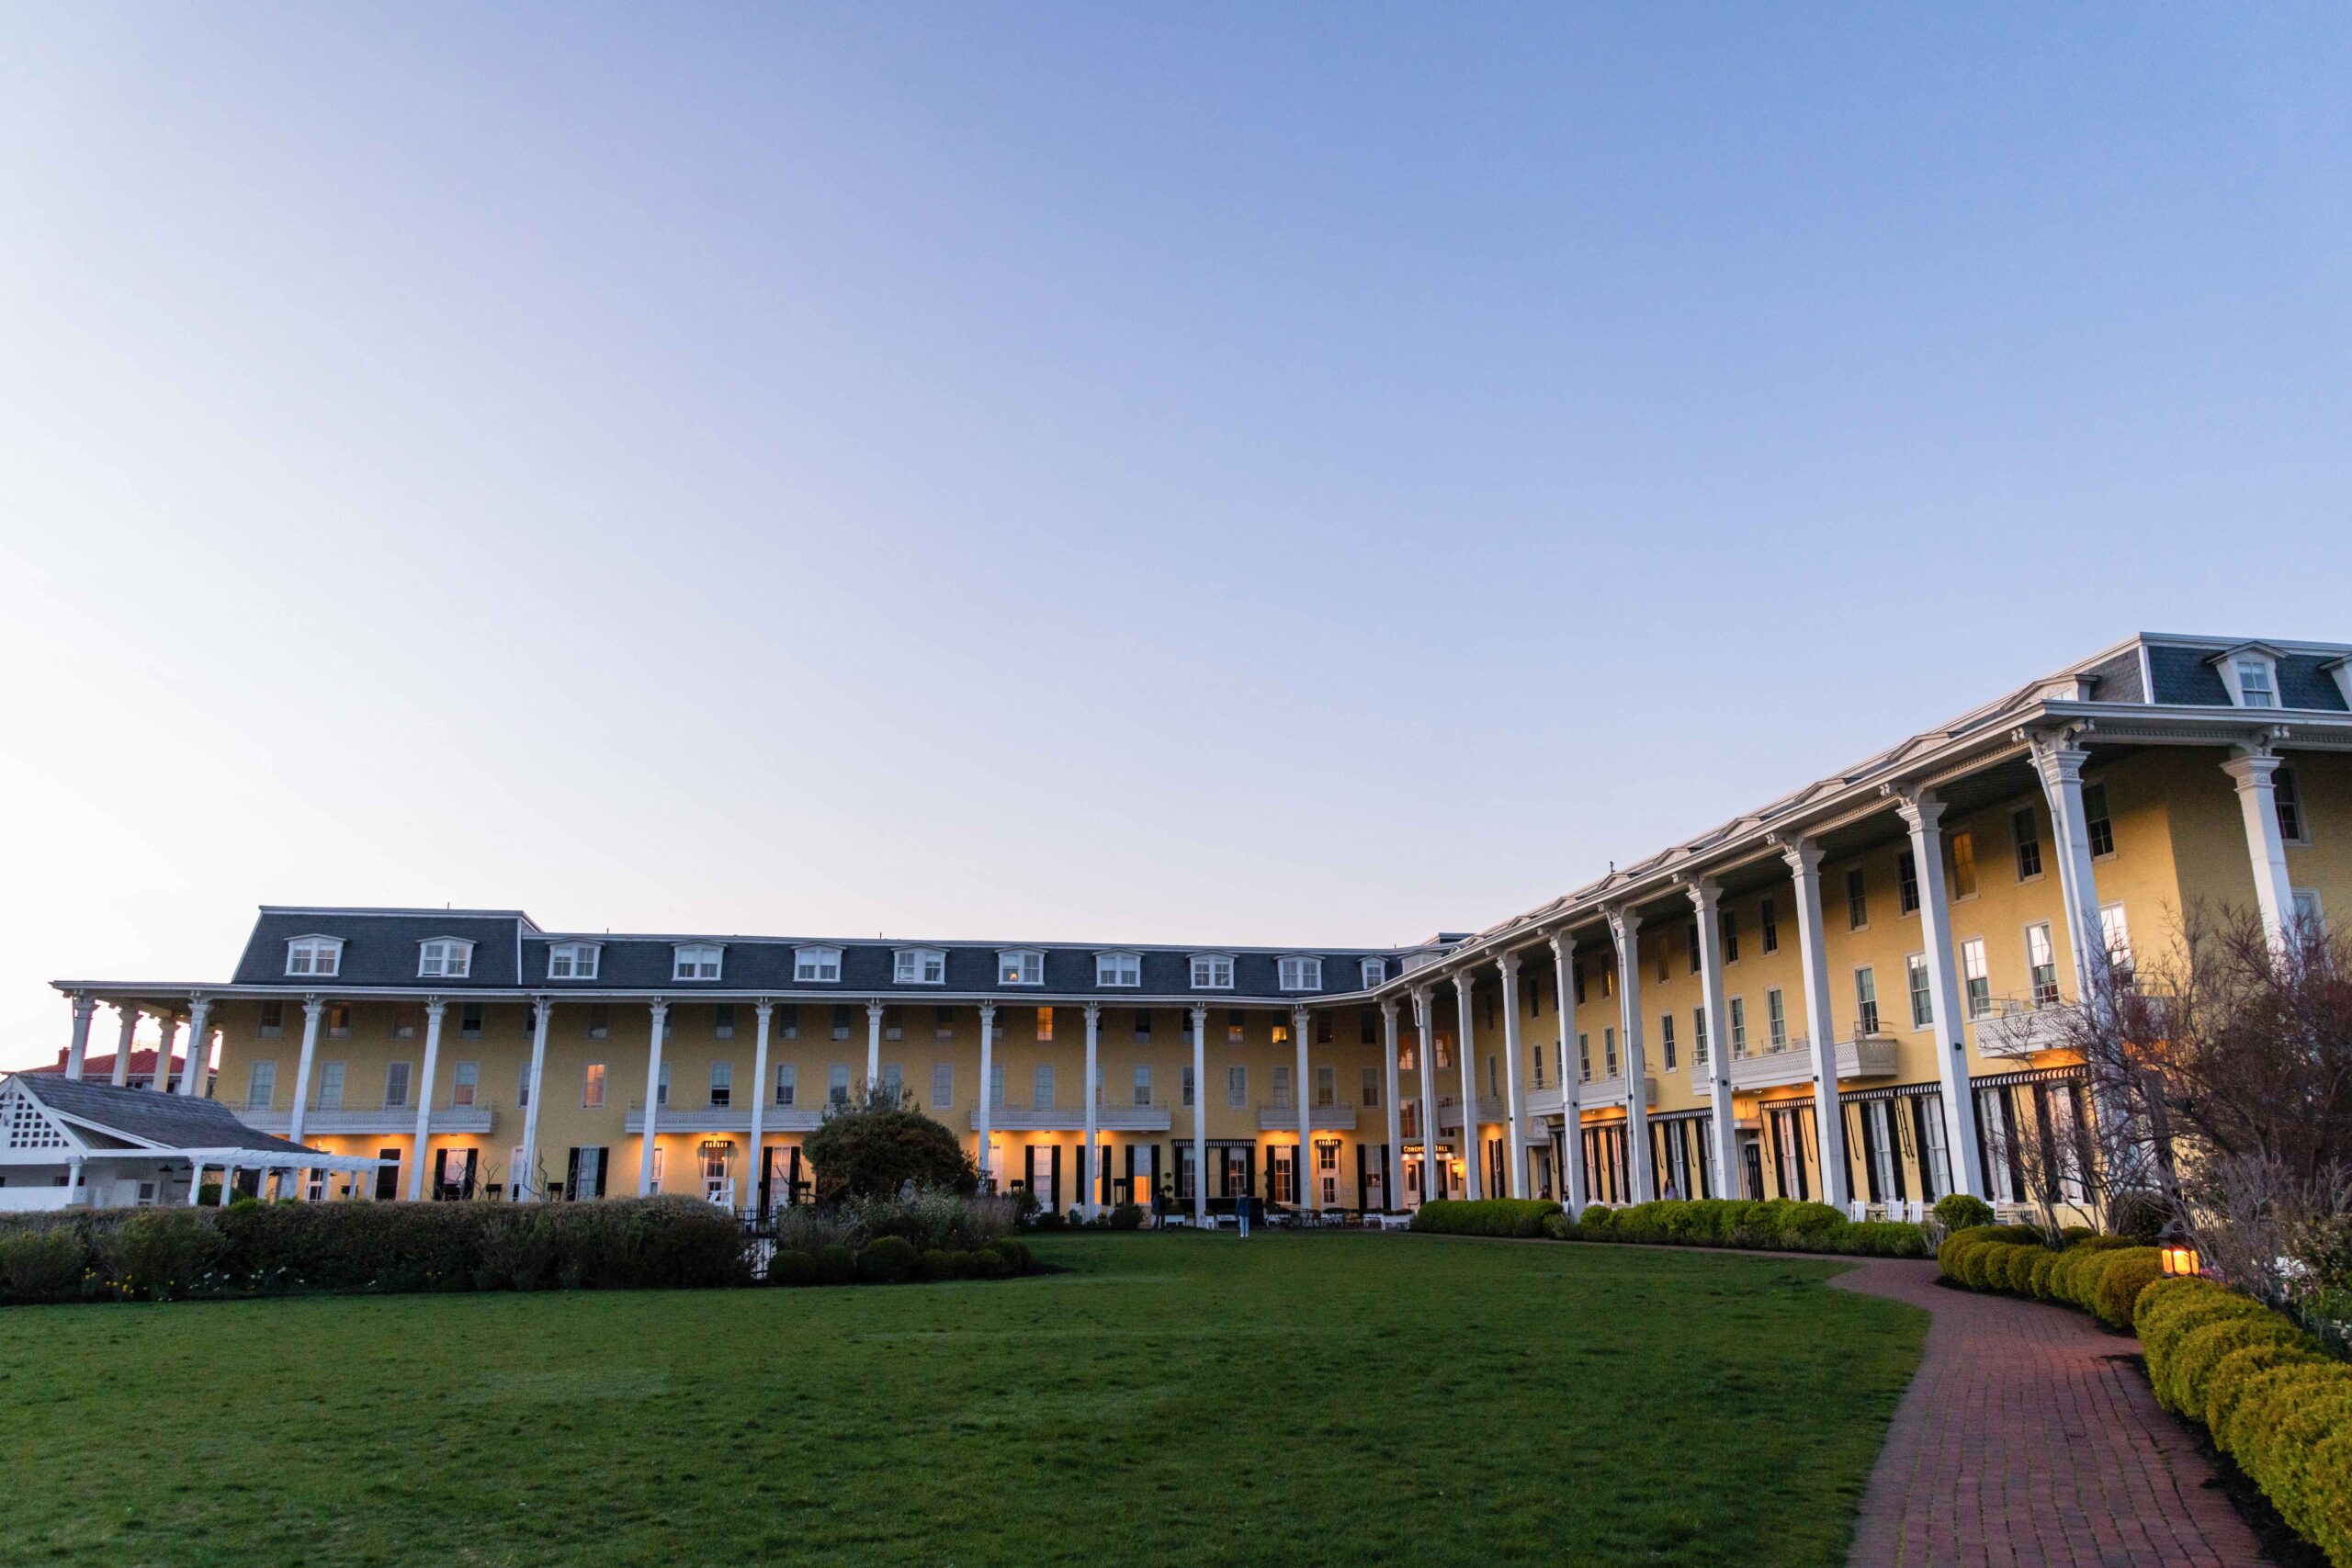 A wide view of Congress Hall and the front lawn during the early evening with a clear blue sky